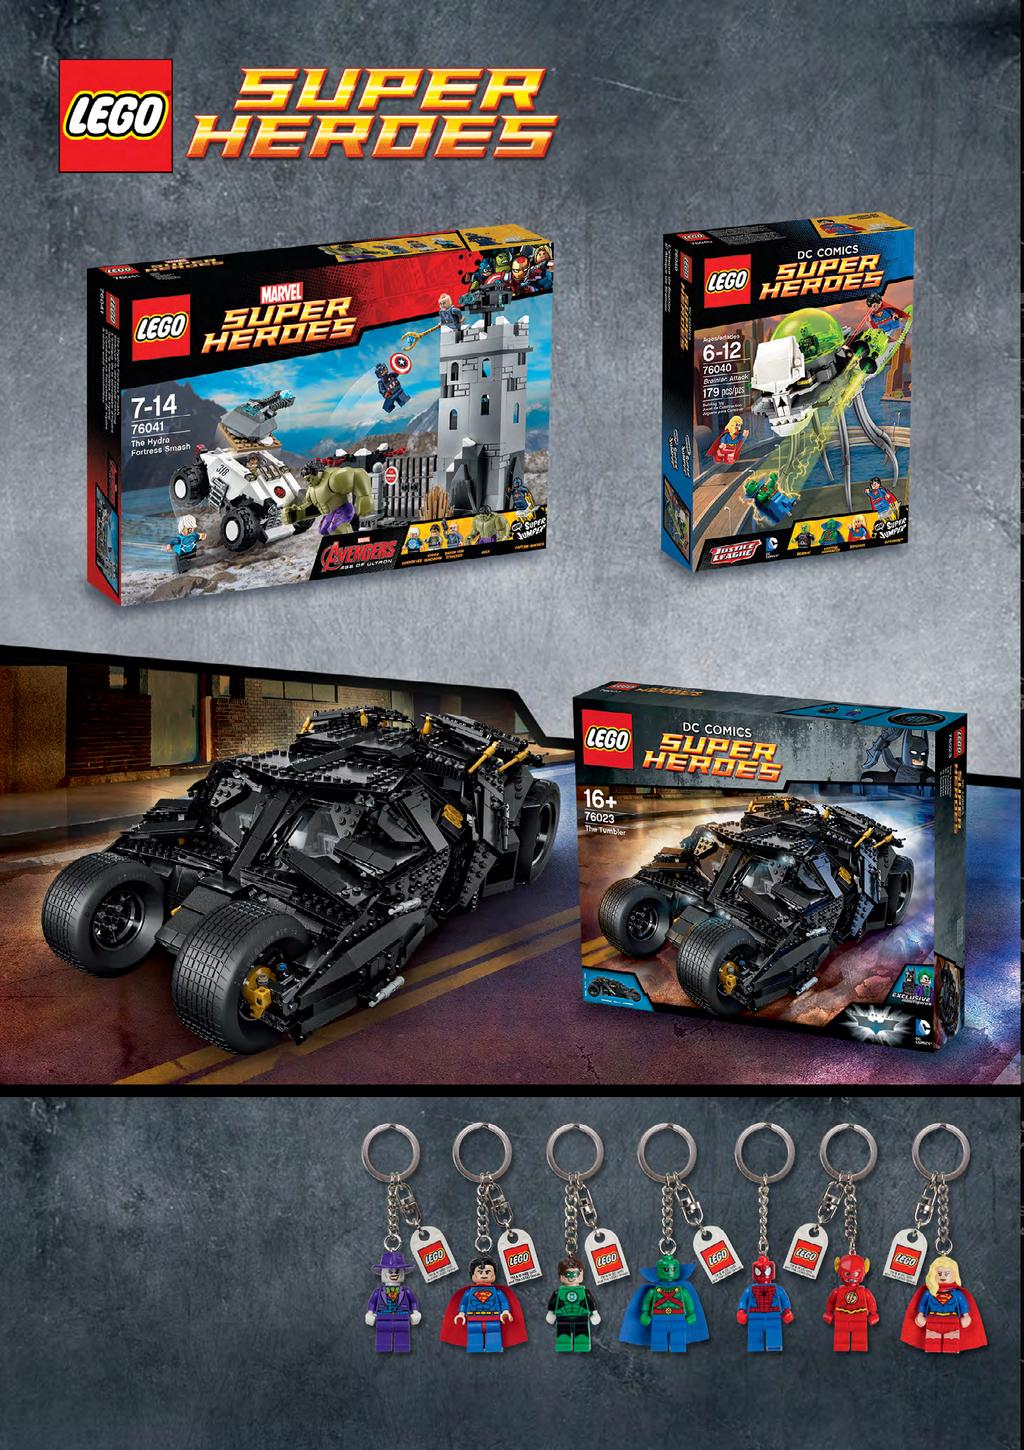 76041 The Hydra Fortress Smash 7 éves kor felett 76040 Brainiac támadása 76023 The Tumbler 1 TM & DC Comics. BATMAN and all related characters and elements are trademarks of and DC Comics.